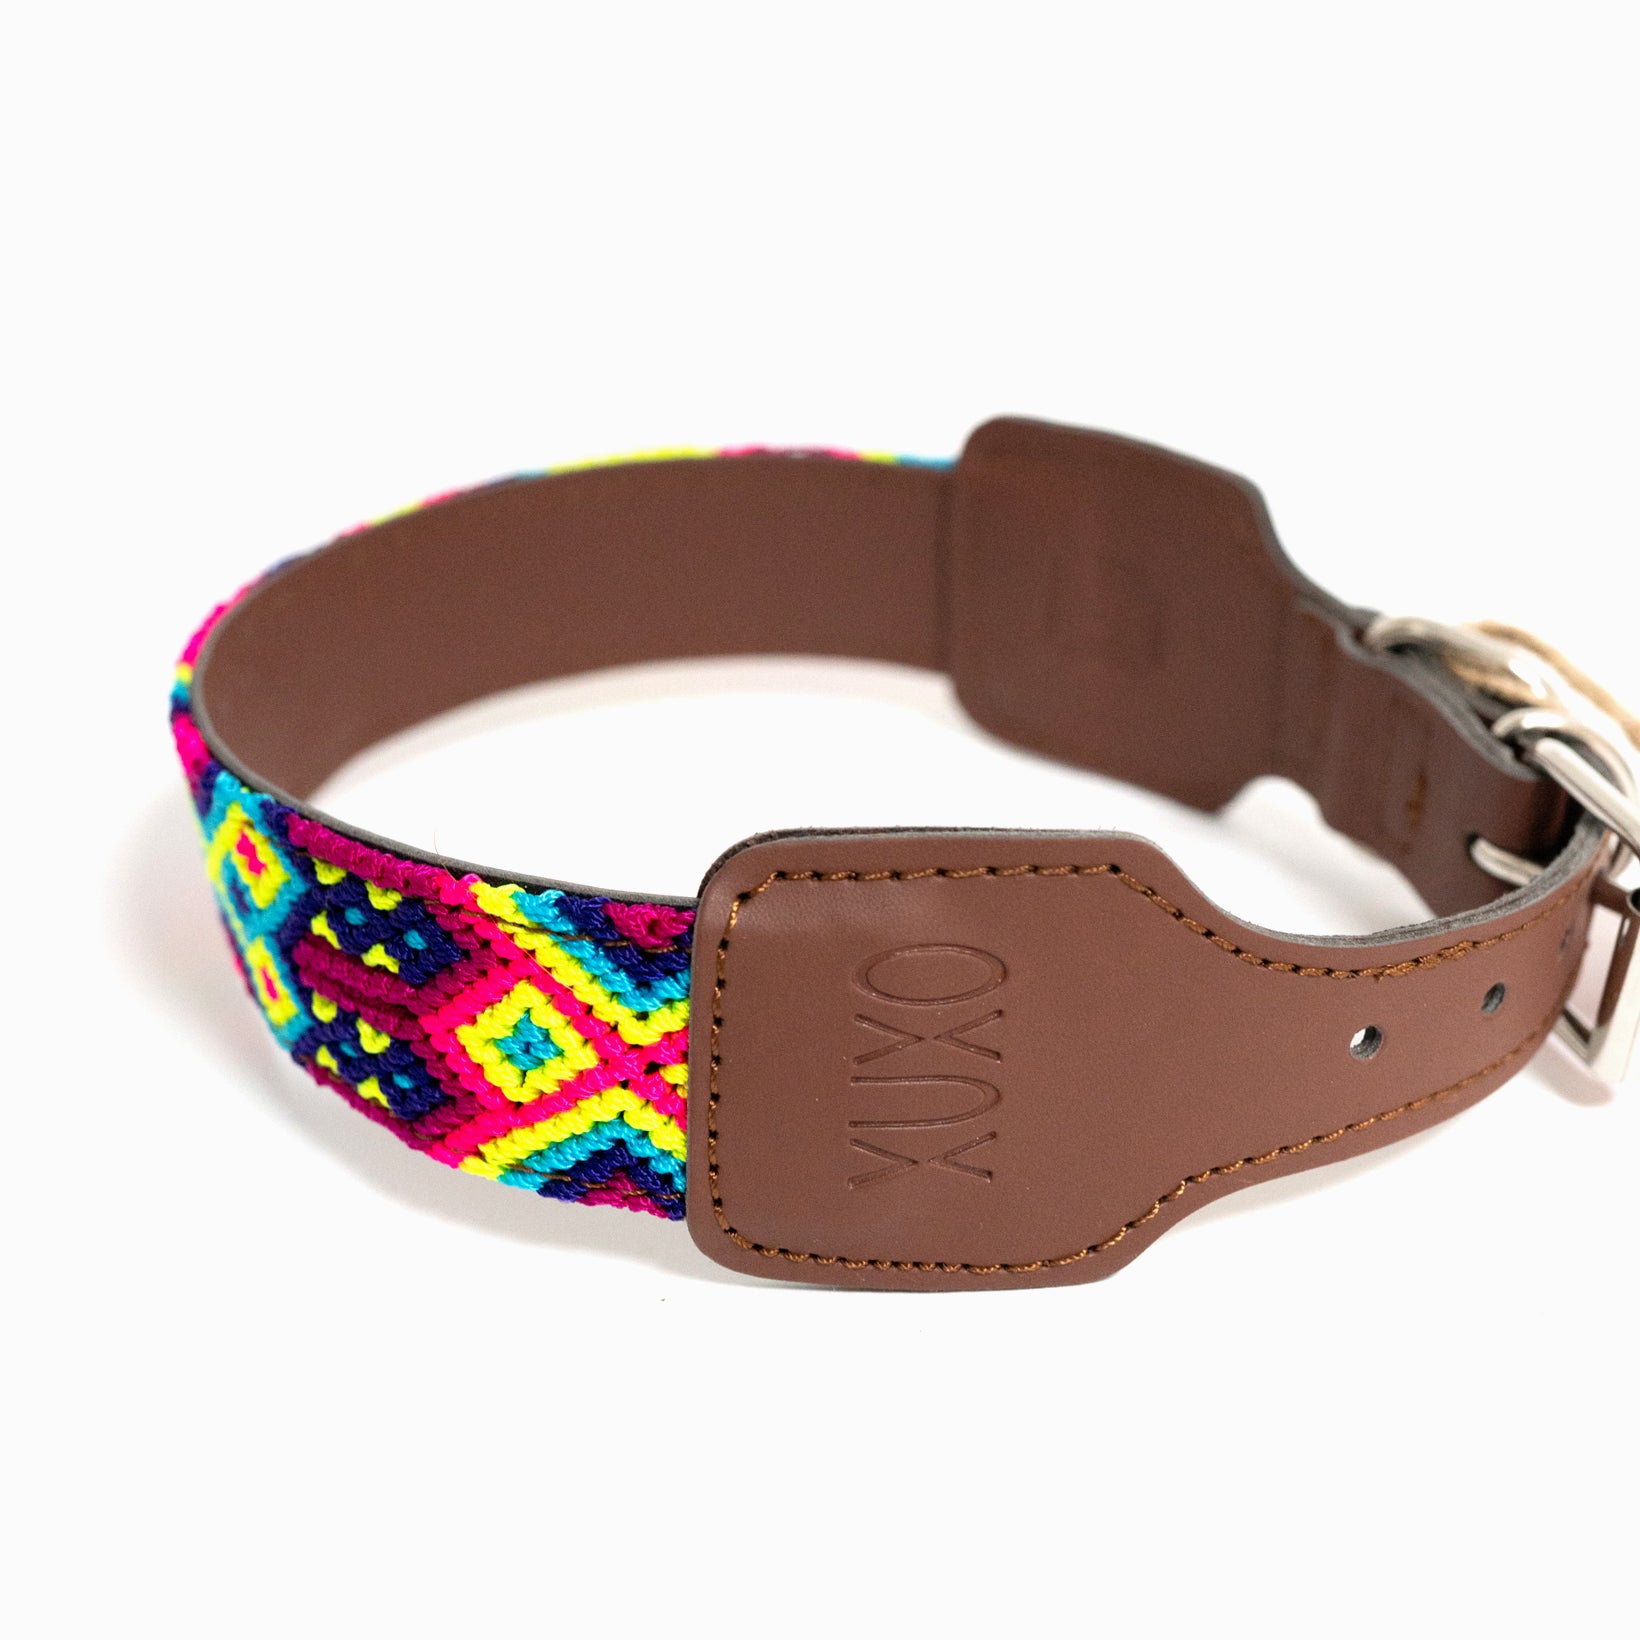 Dog Collar XUXO Hand Made in Mexico L